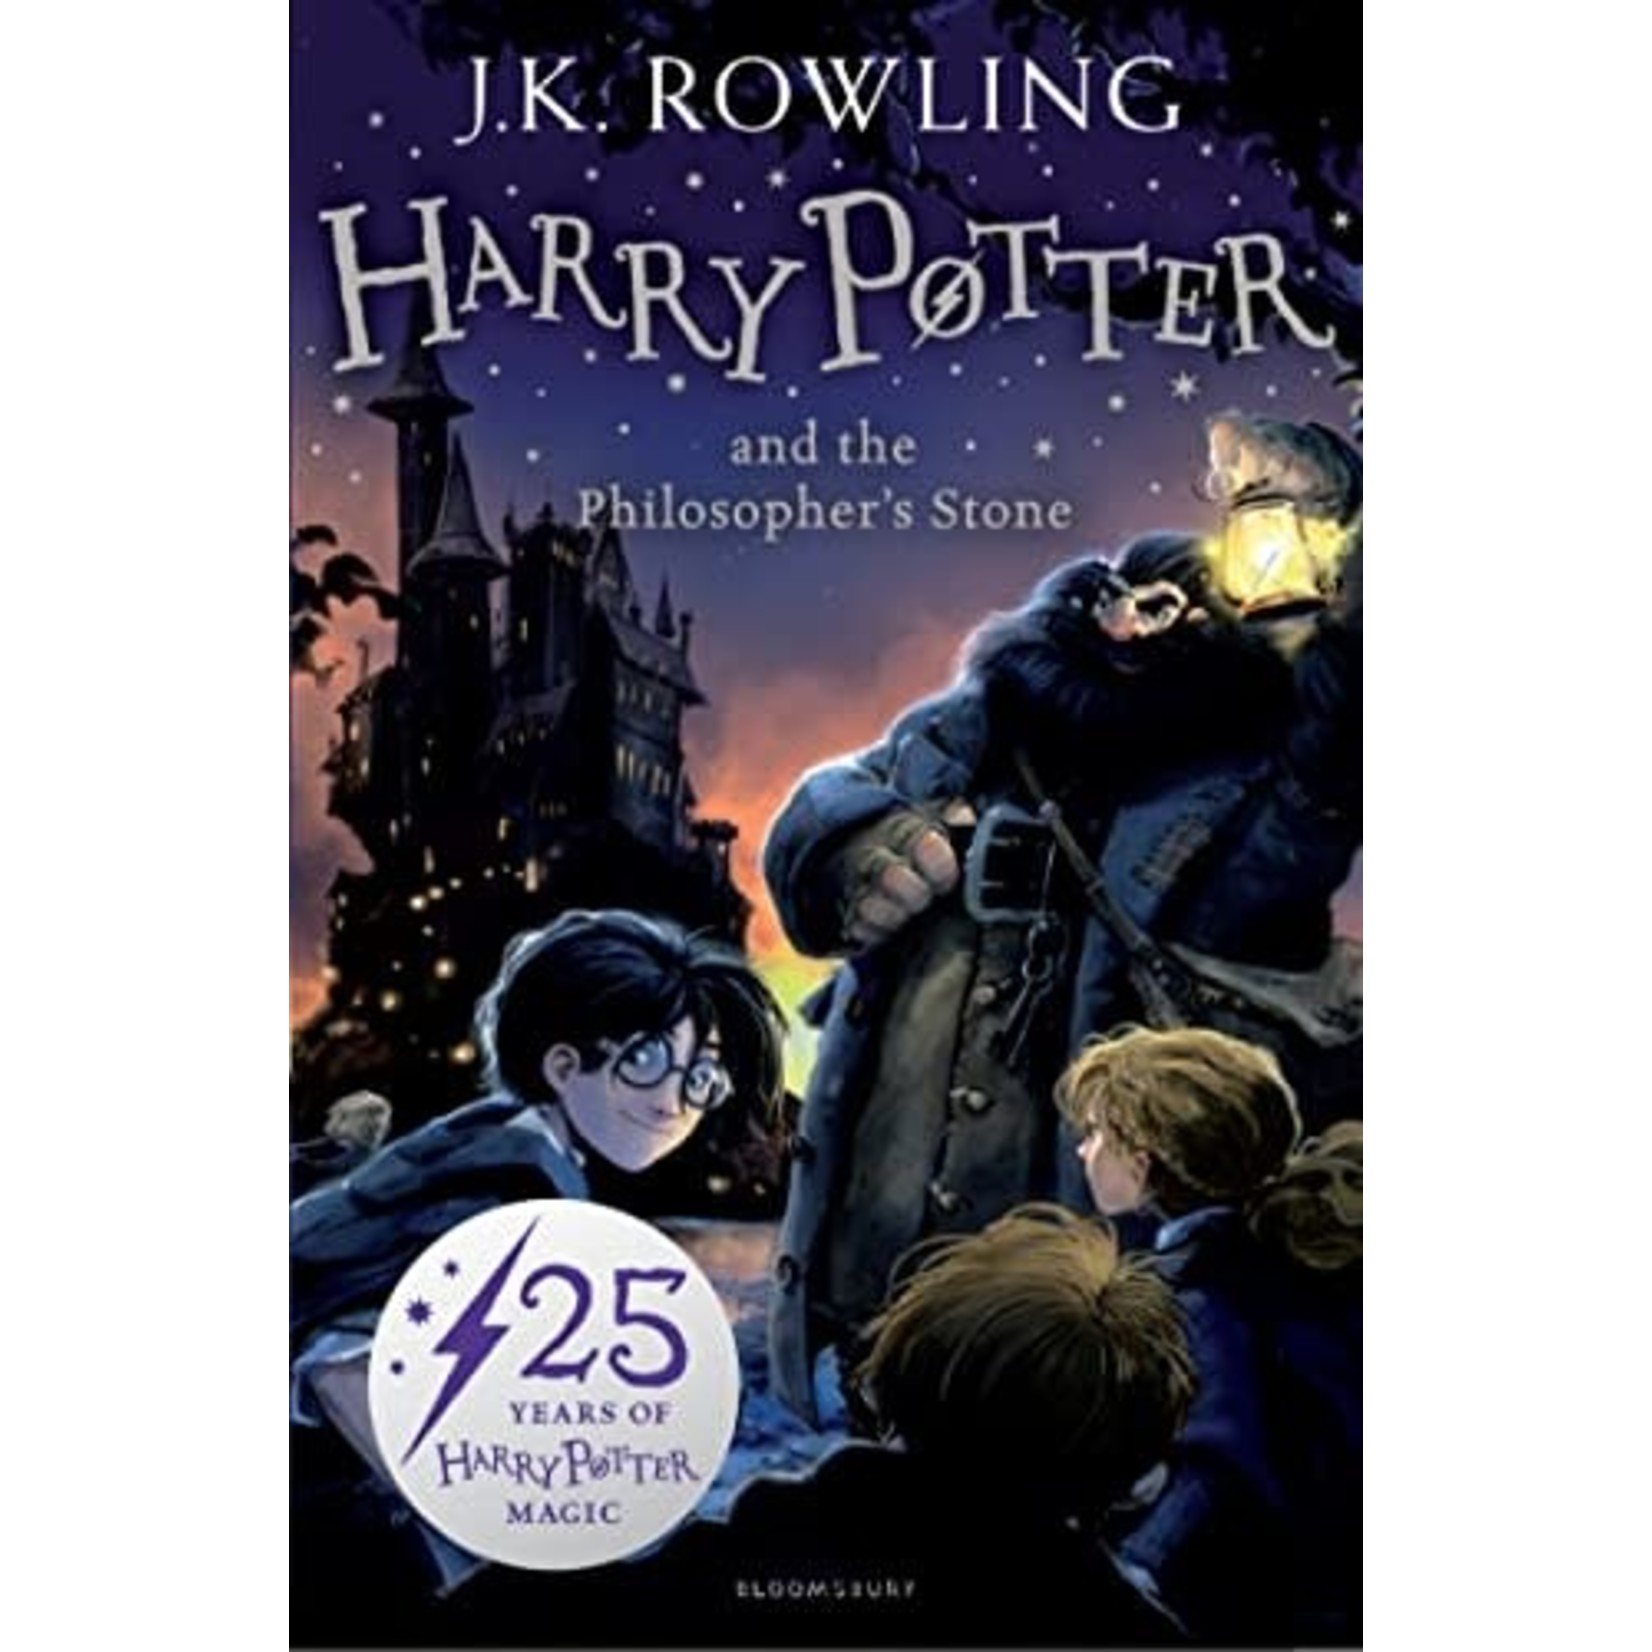 USED Harry Potter and the Philosopher's Stone